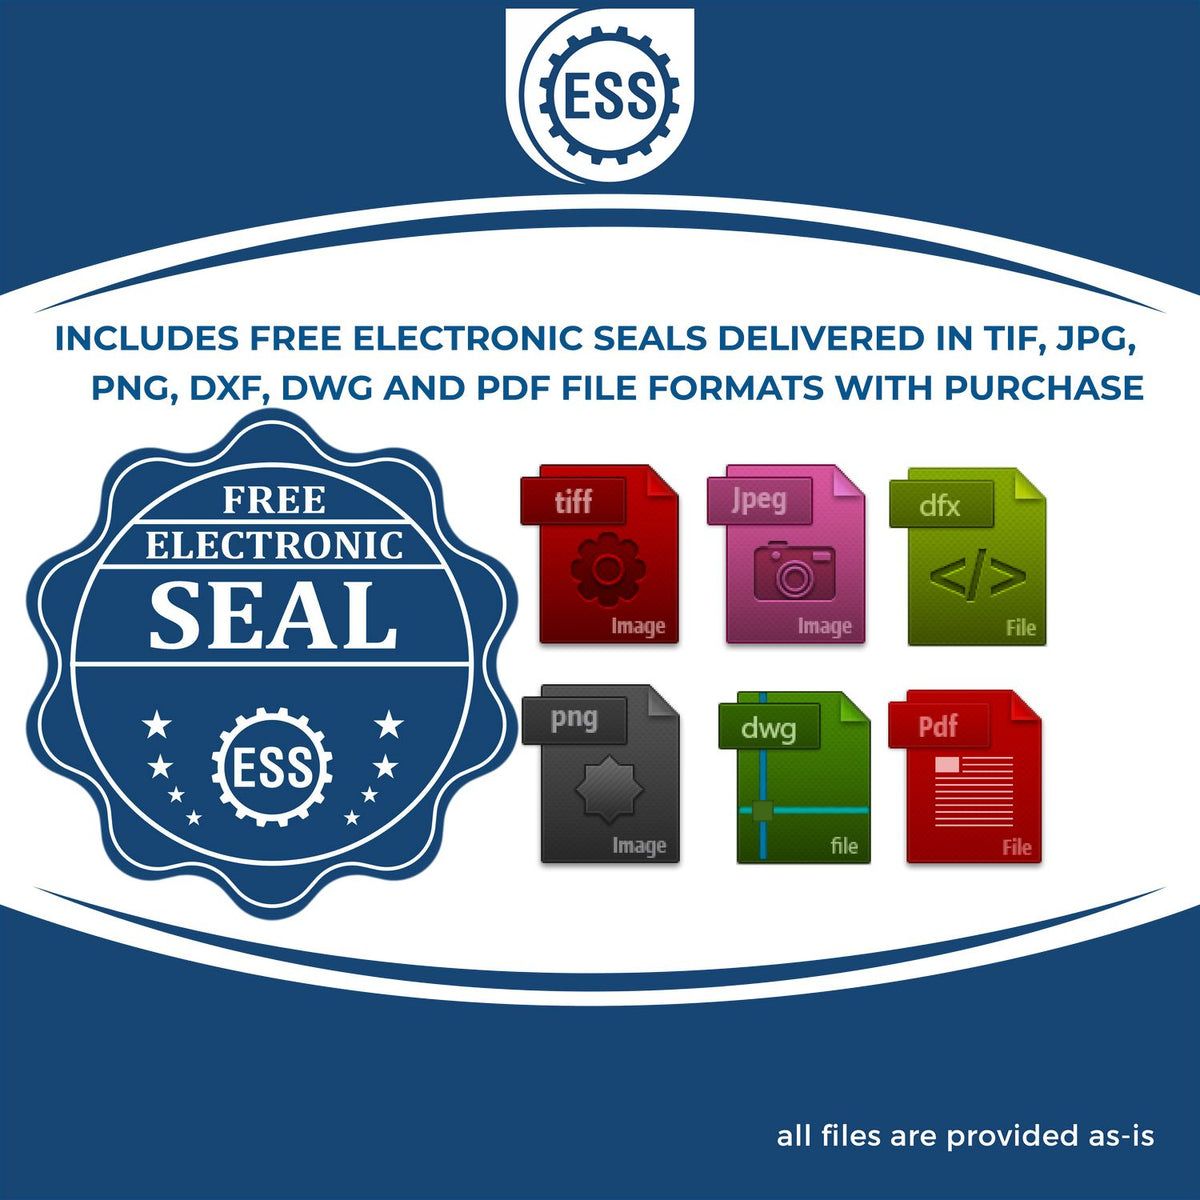 An infographic for the free electronic seal for the State of Oregon Extended Long Reach Geologist Seal illustrating the different file type icons such as DXF, DWG, TIF, JPG and PNG.